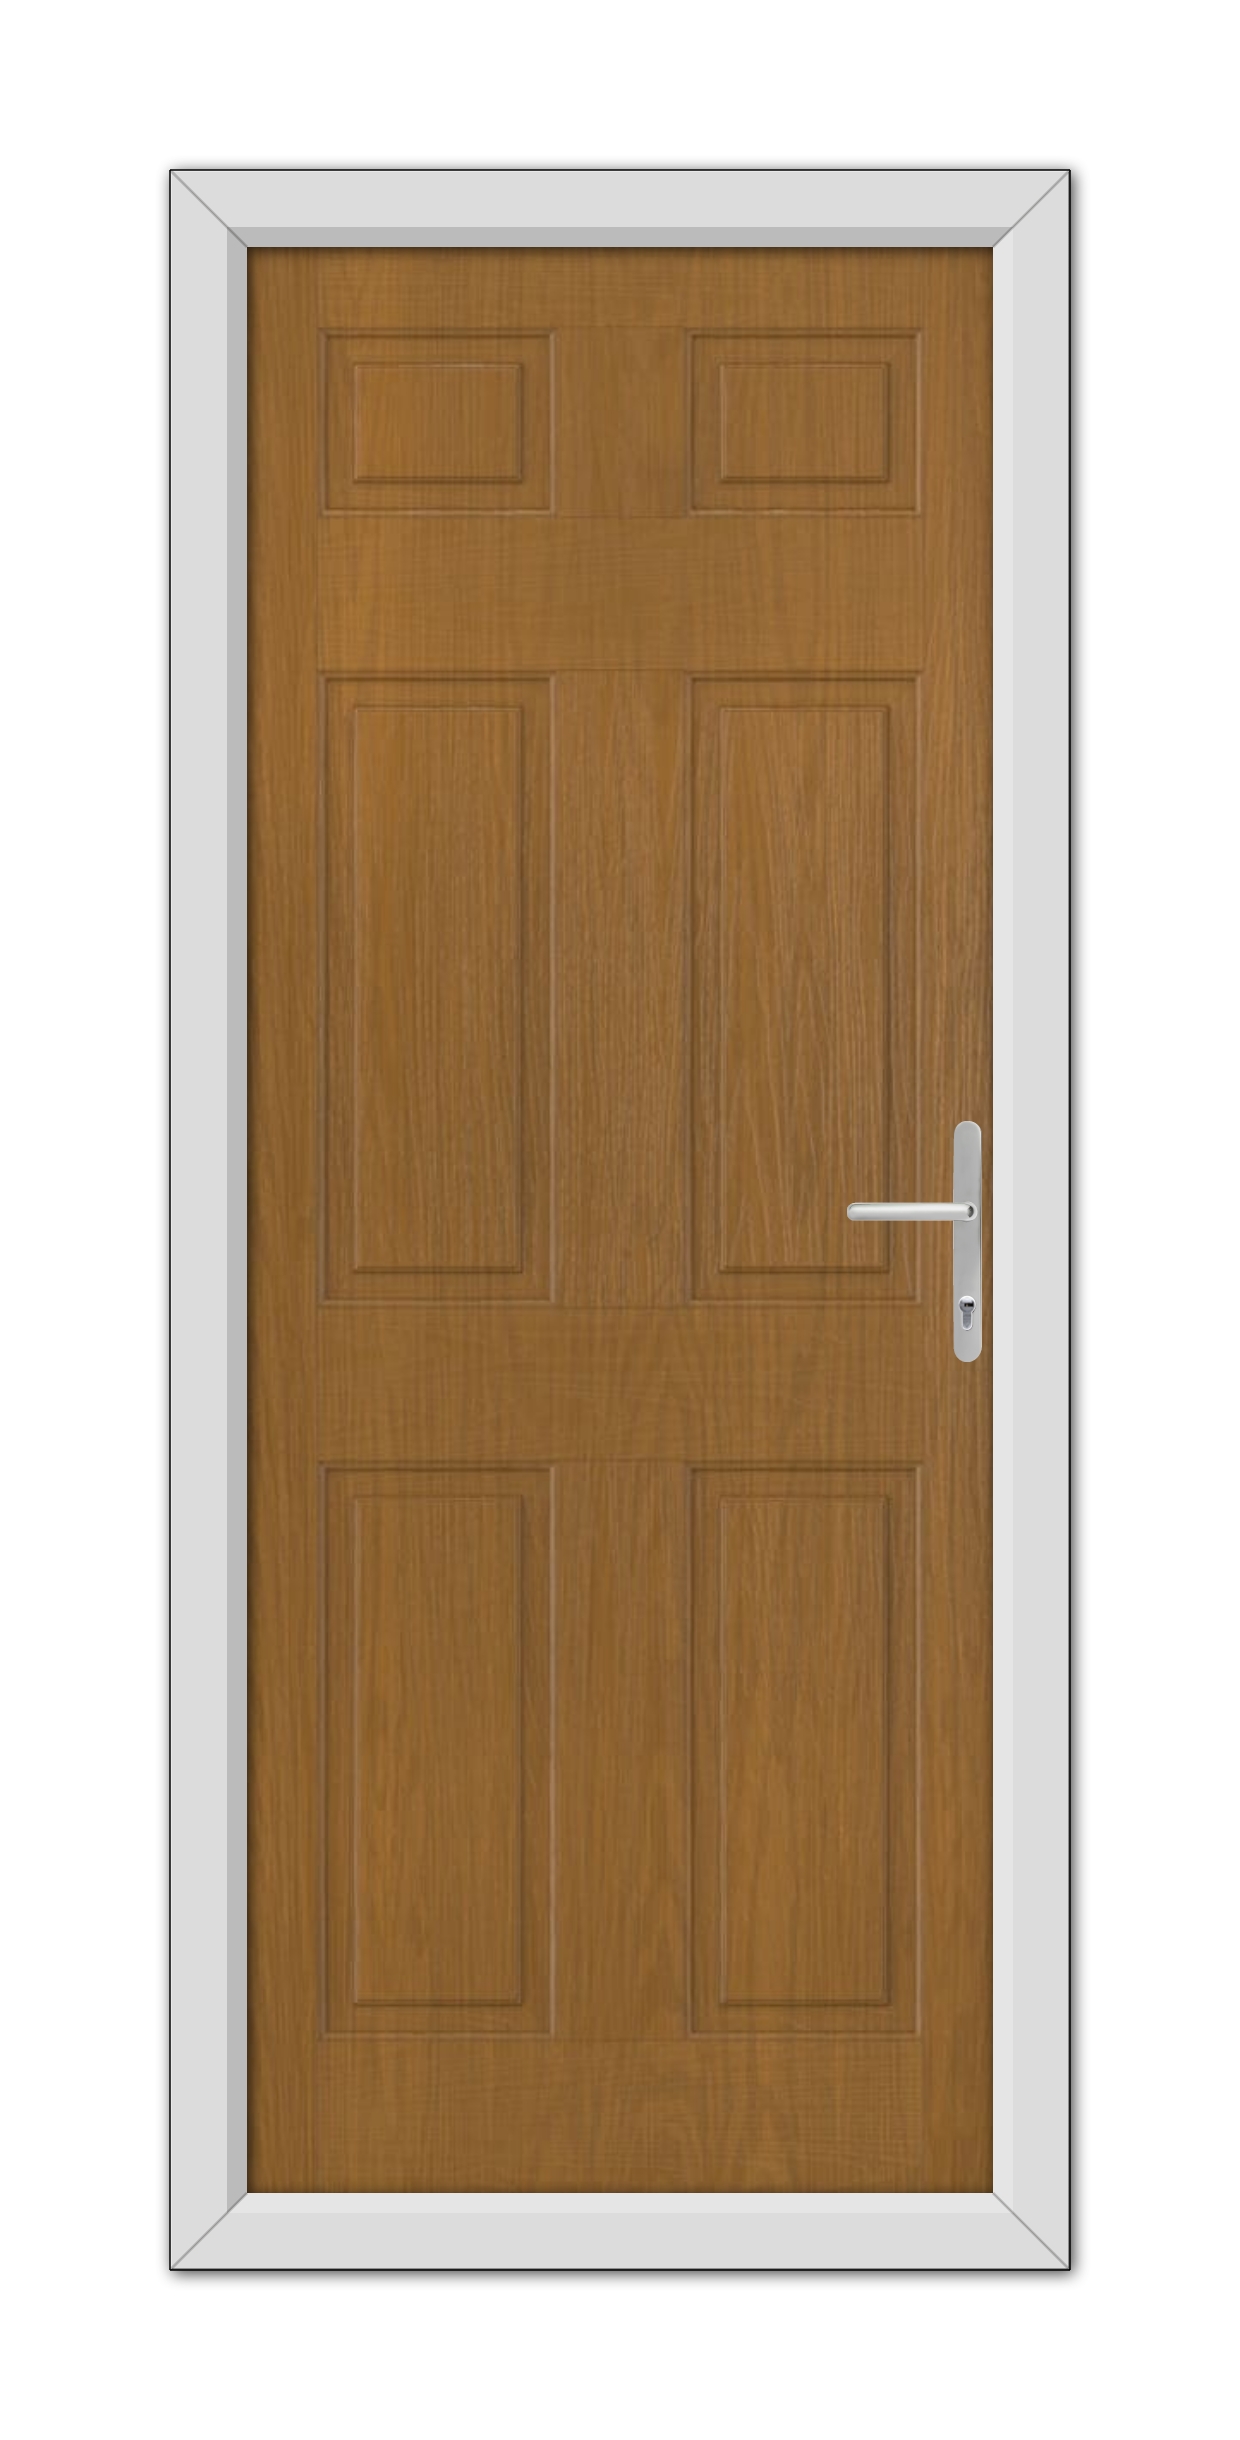 A Oak Middleton Solid Composite Door 48mm Timber Core with a white frame and a metallic handle, set against a plain background.